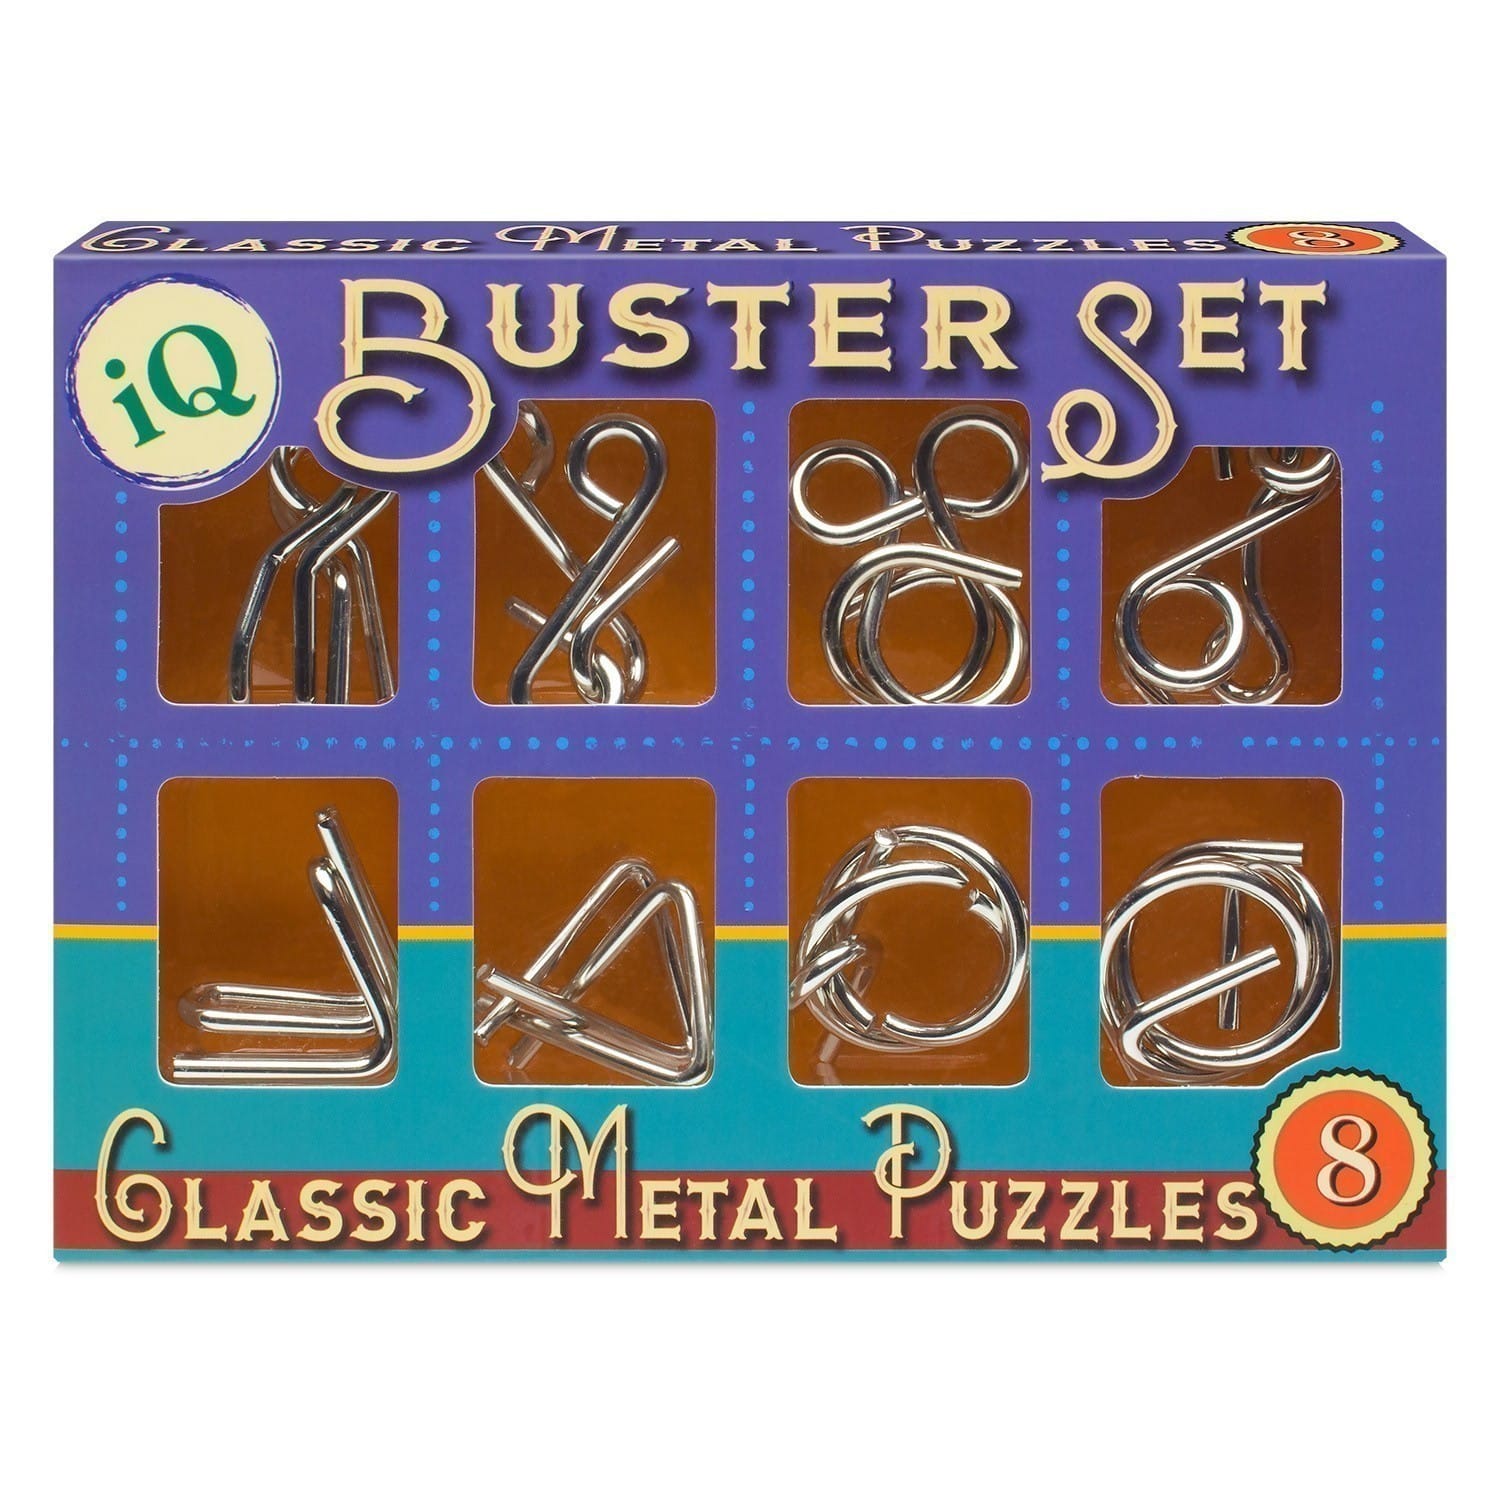 iQ Buster Set - 8 Classic Metal Puzzles